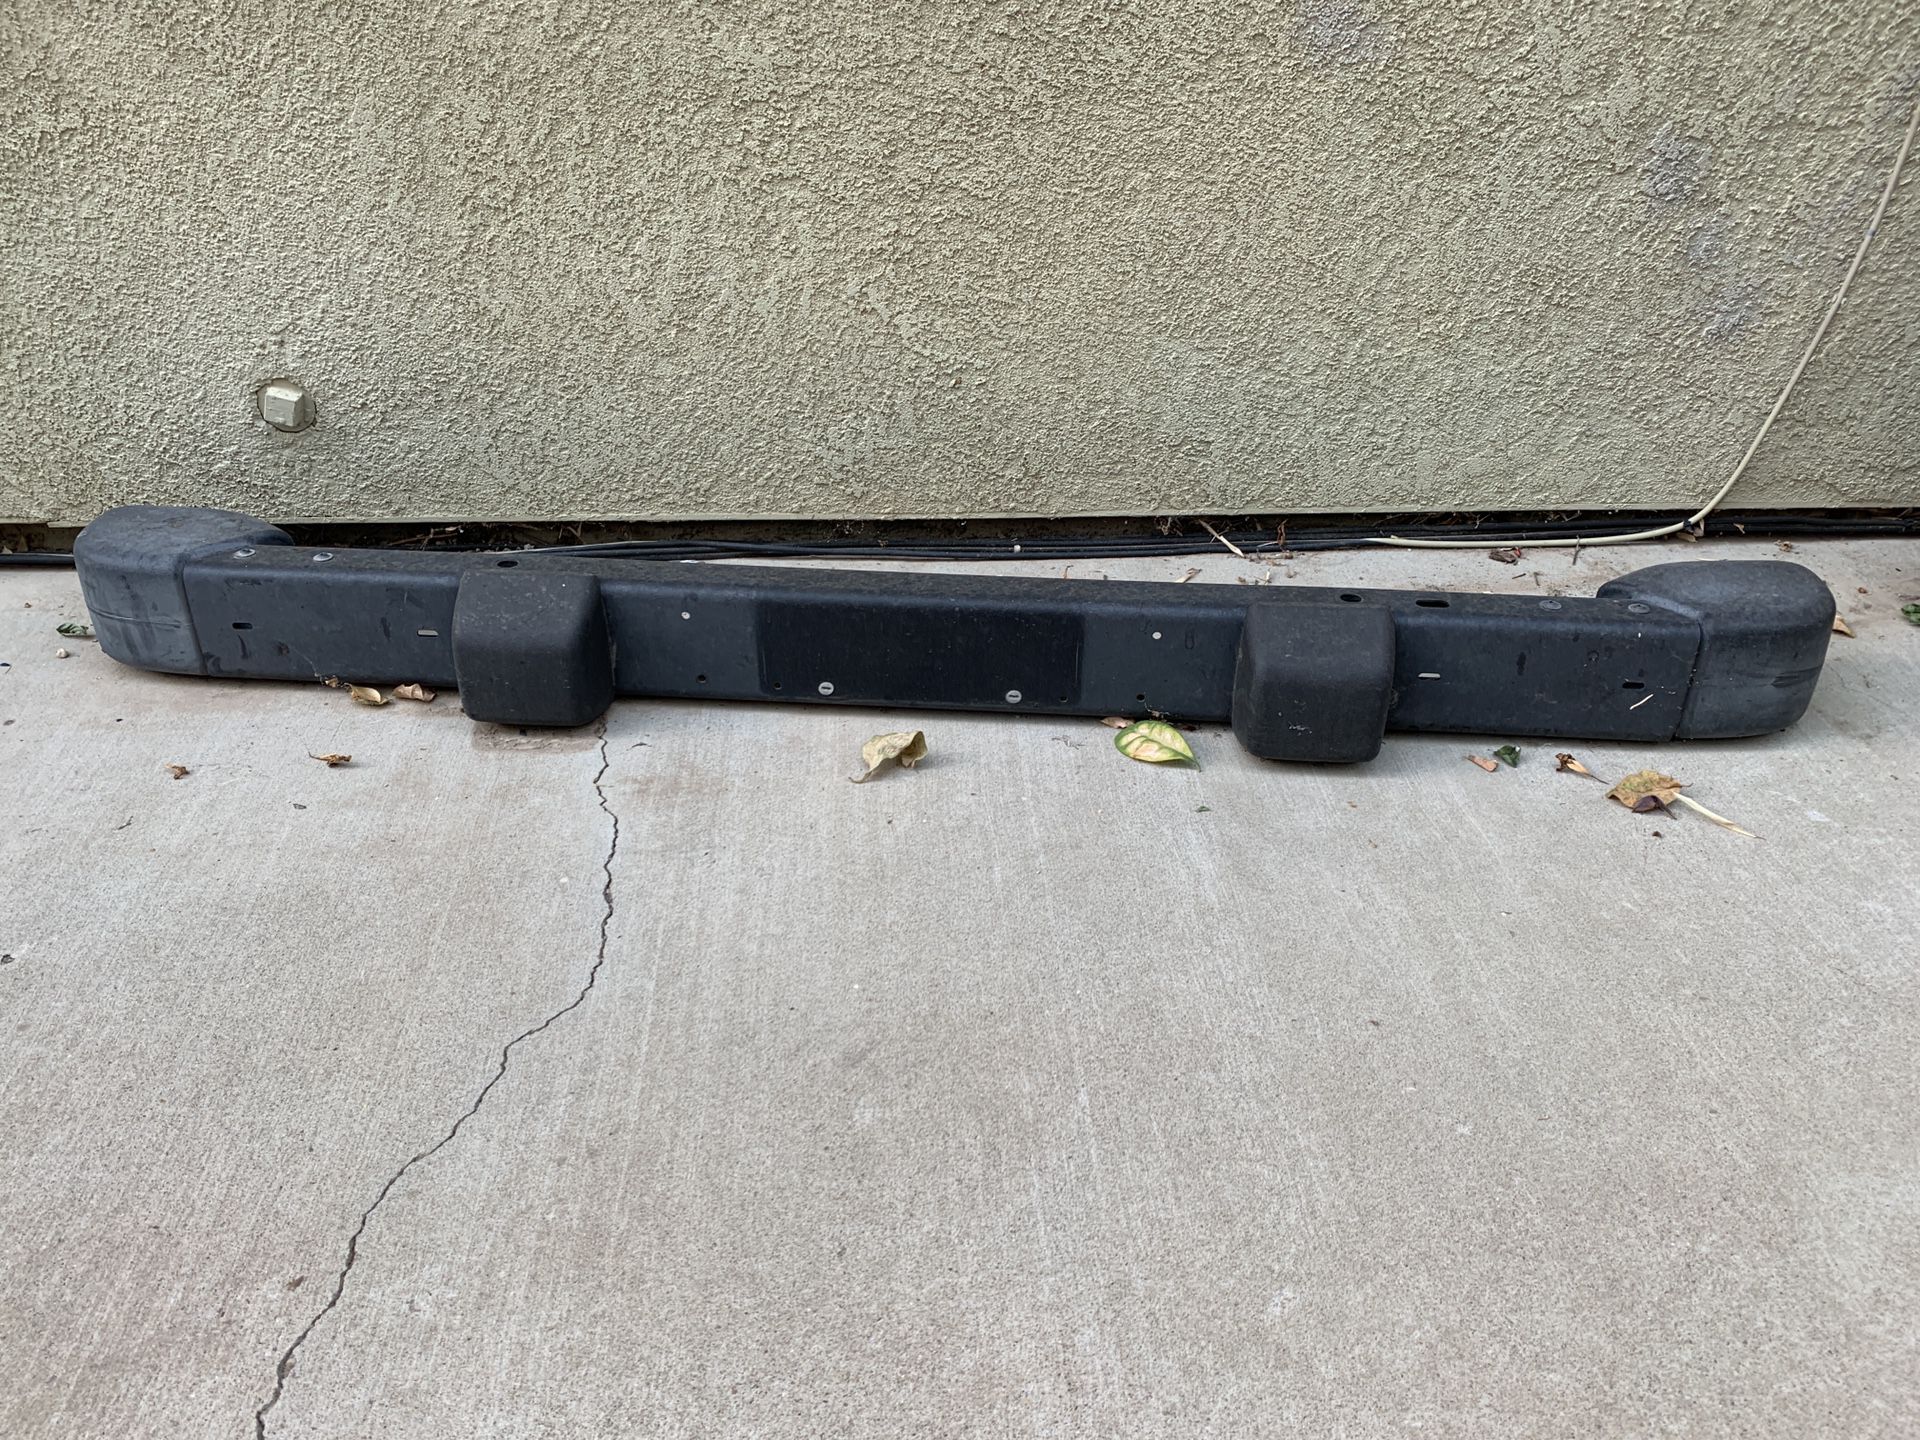 Front bumper for 2001 Jeep Wrangler